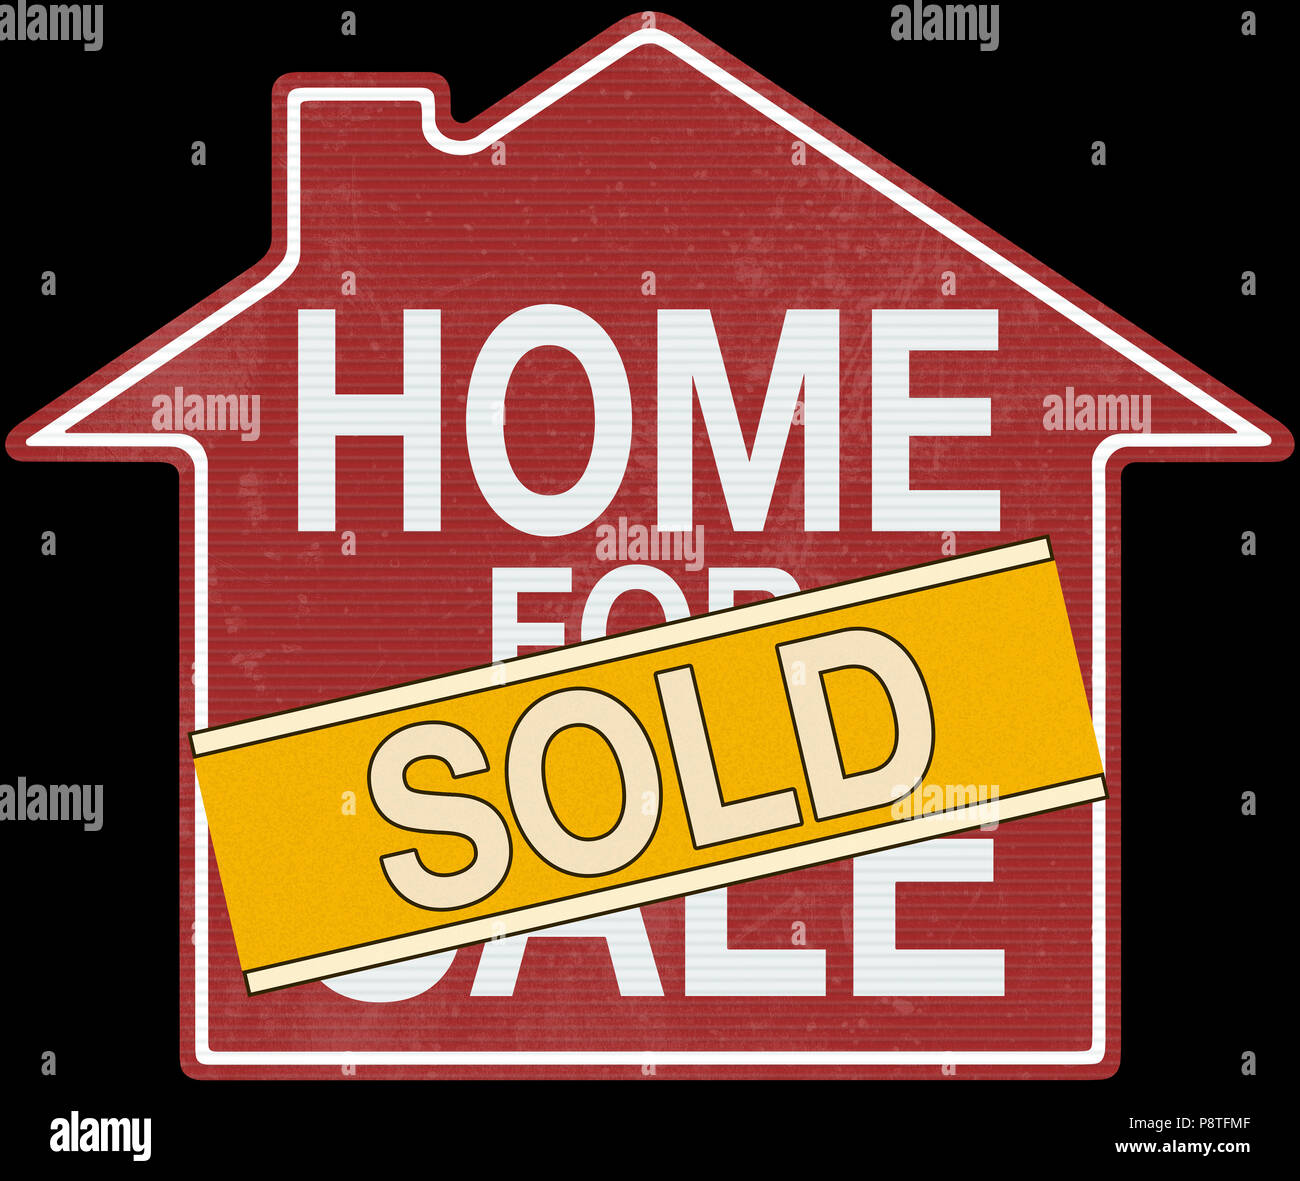 2D illustration. Sign of home for sale in red and sold in yellow over black background. Clipping path included. Stock Photo